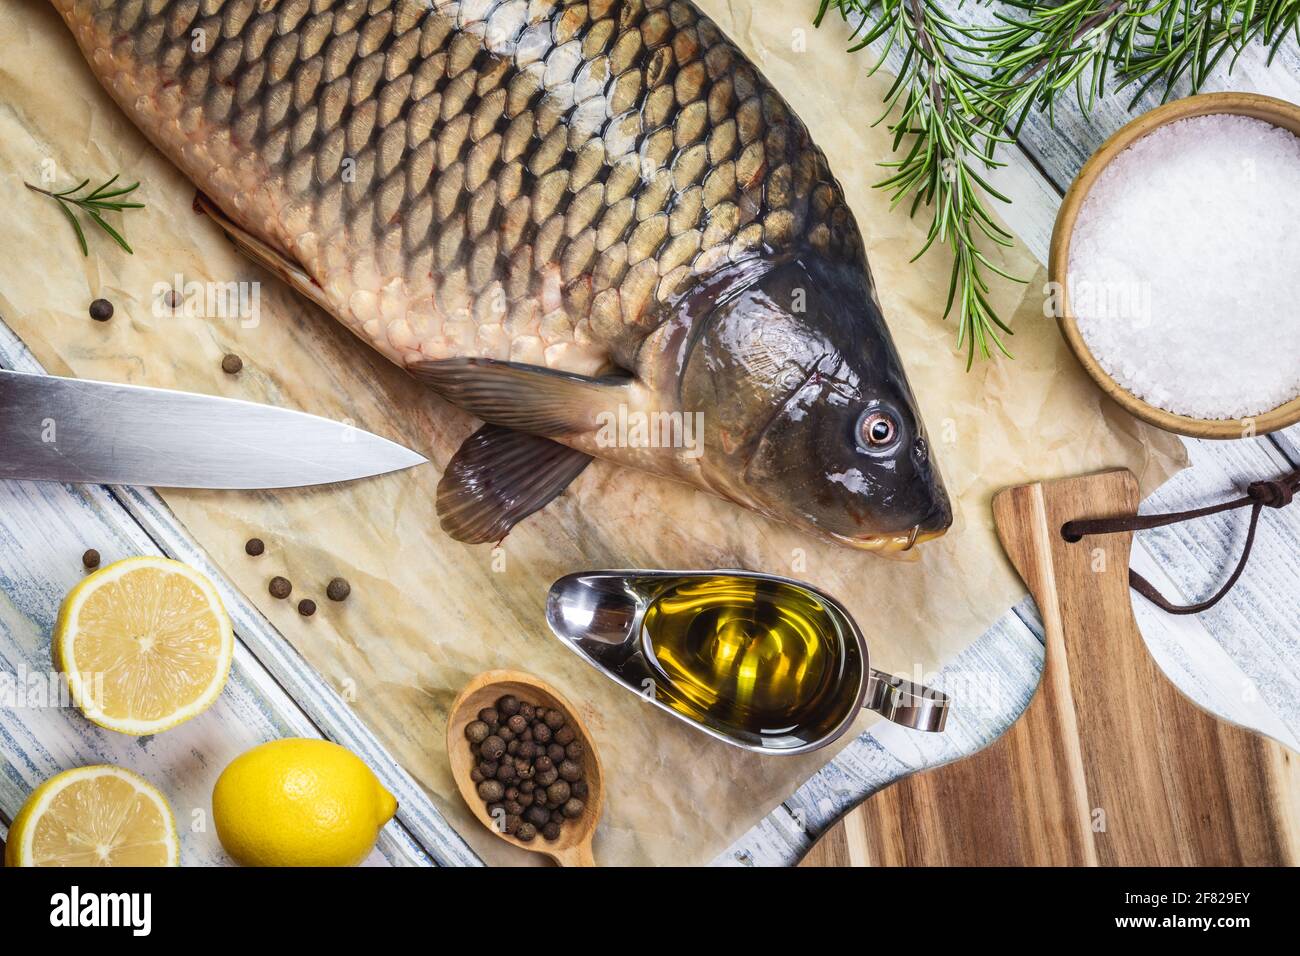 https://c8.alamy.com/comp/2F829EY/preparing-and-cooking-healthy-food-carp-fish-herb-seasoning-and-ingredients-on-table-2F829EY.jpg